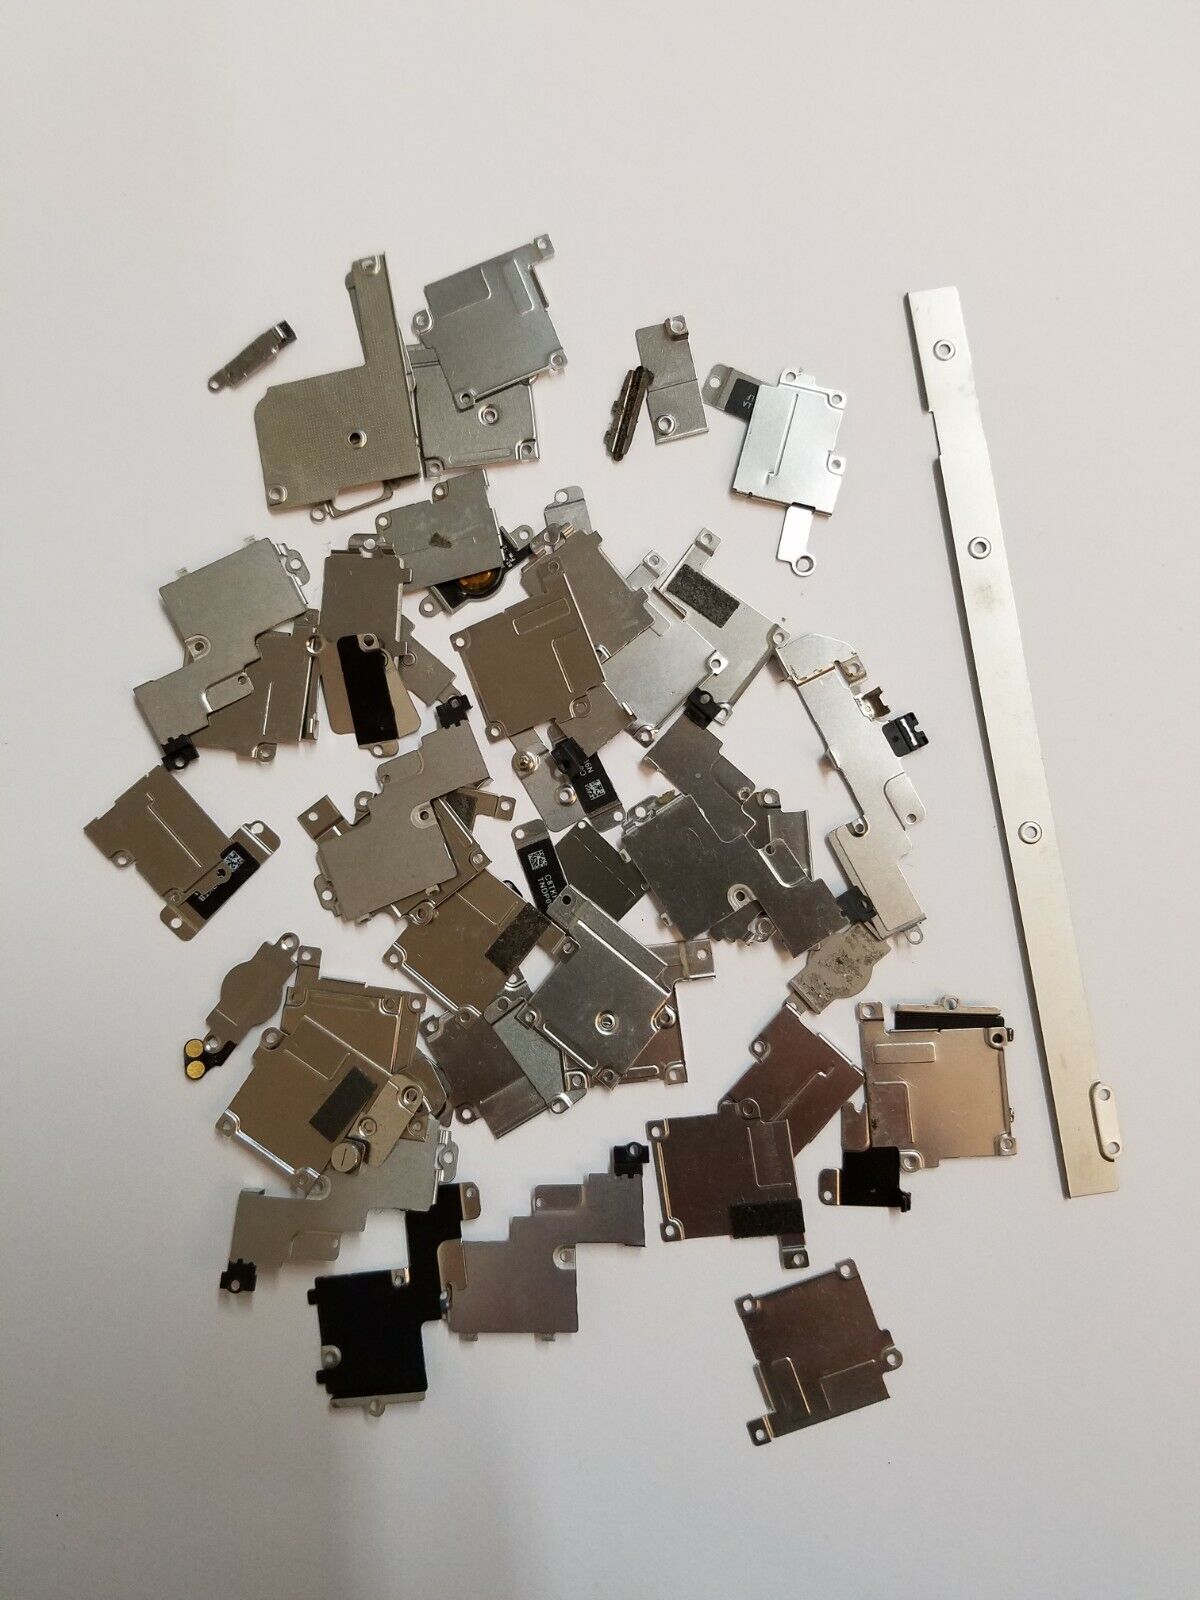 Lot of Replacement Plates Parts For Apple iPhone iPad Samsung LG Google Phones